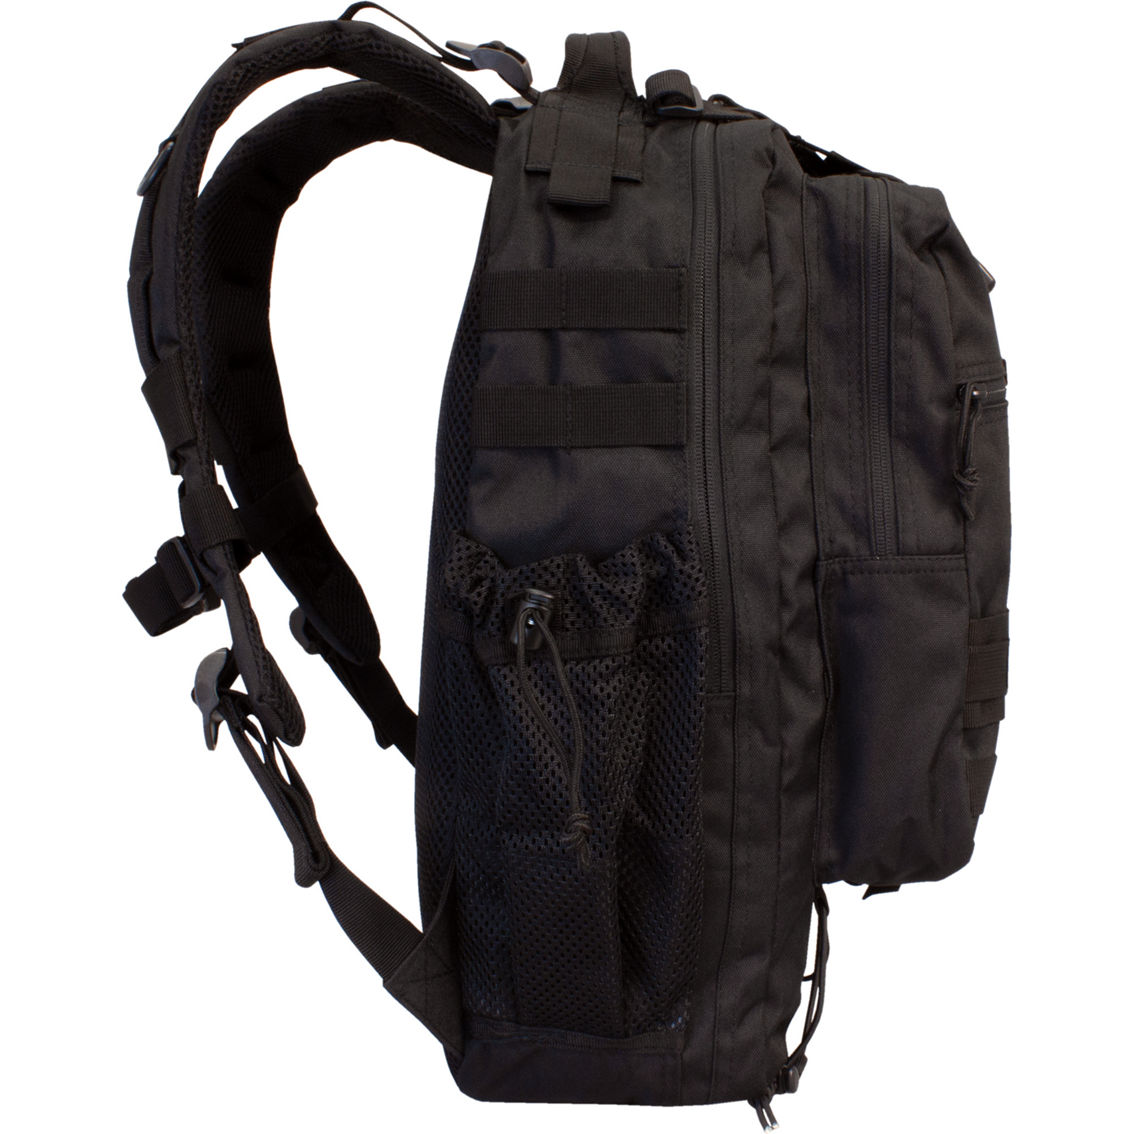 Red Rock Outdoor Gear Summit Backpack - Image 4 of 6